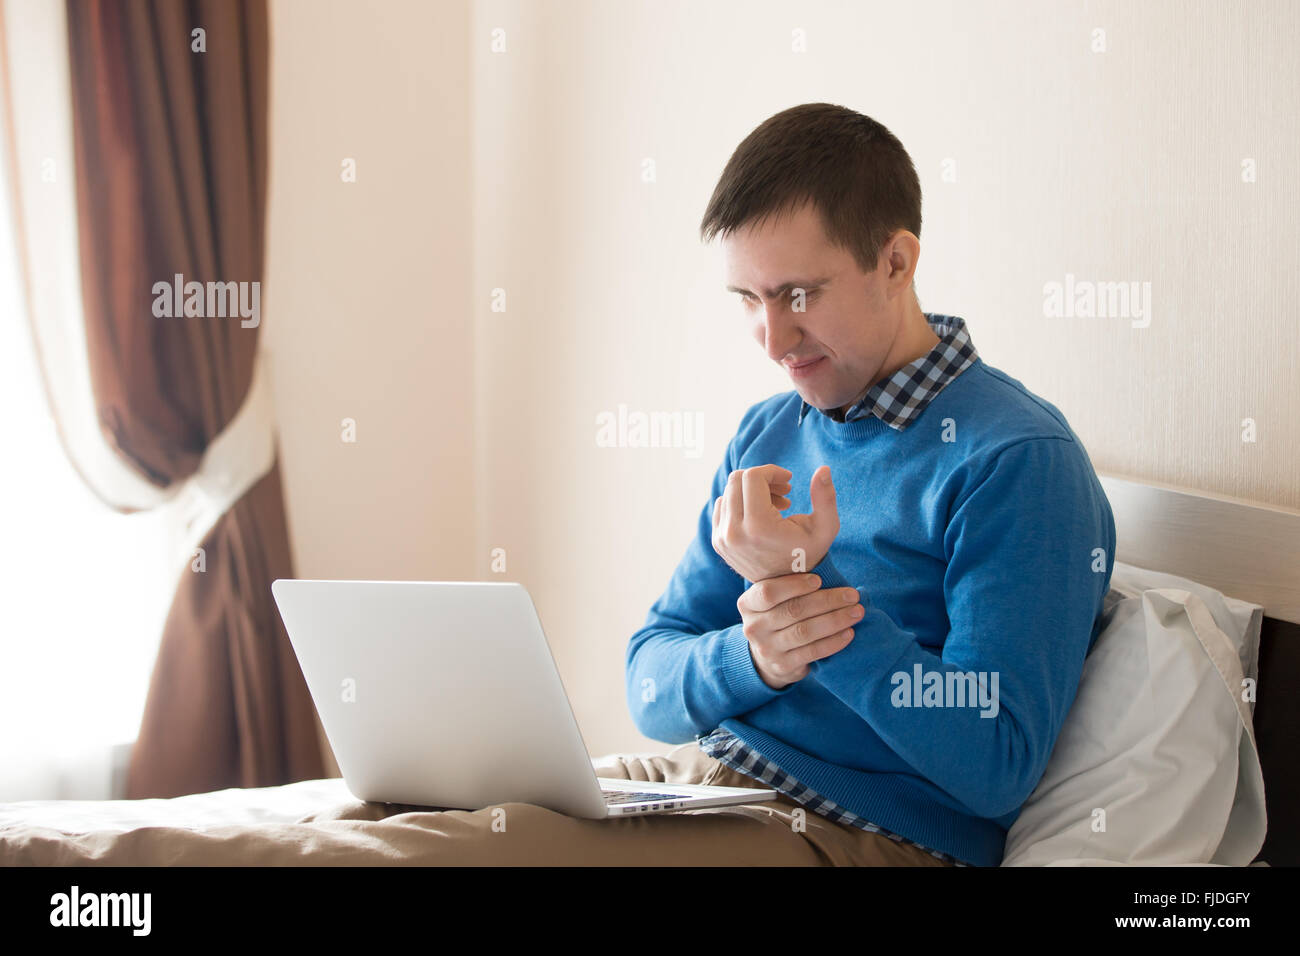 Portrait of young stressed man sitting on bed with laptop wearing smart casual clothing, touching his aching wrist with pained Stock Photo